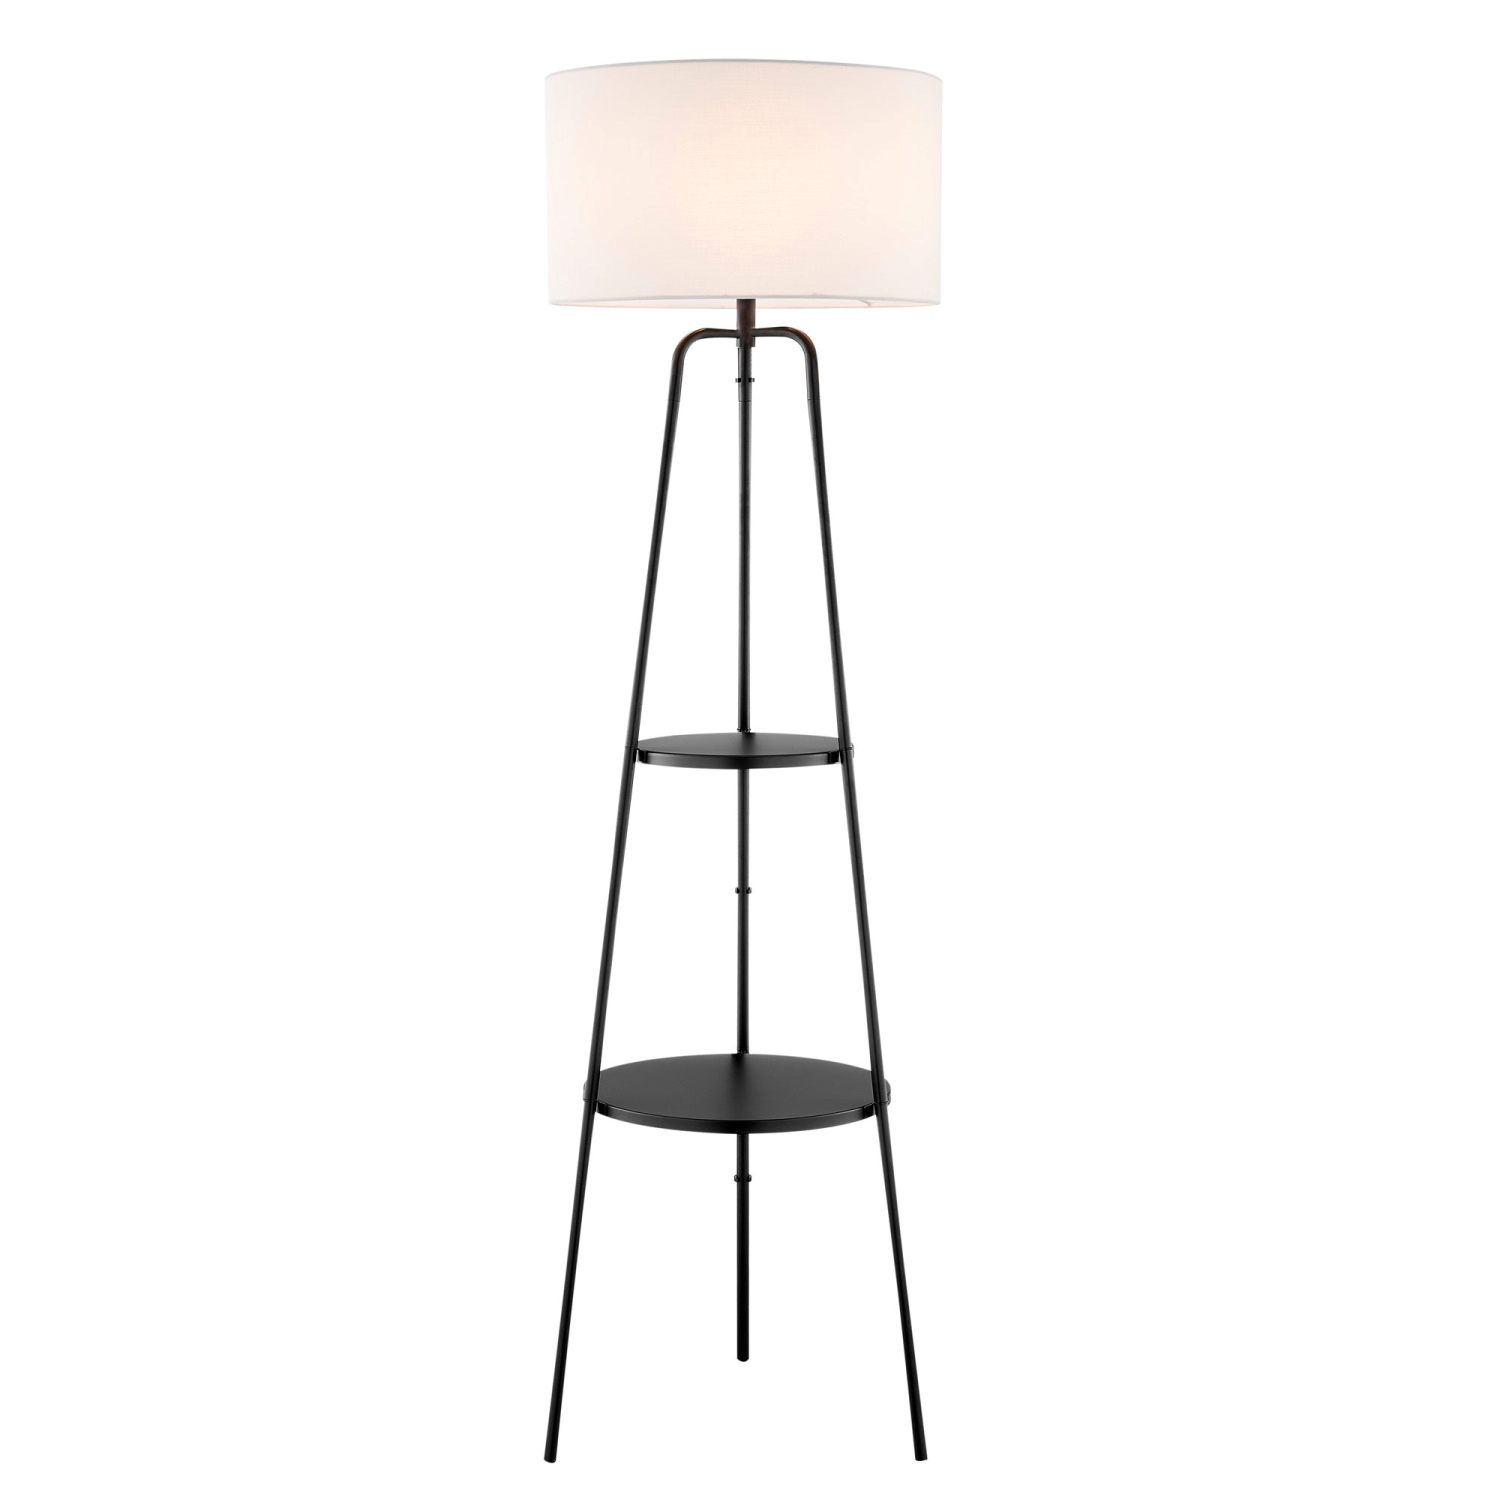 Patterson Floor Lamp Picture with White Background Light On